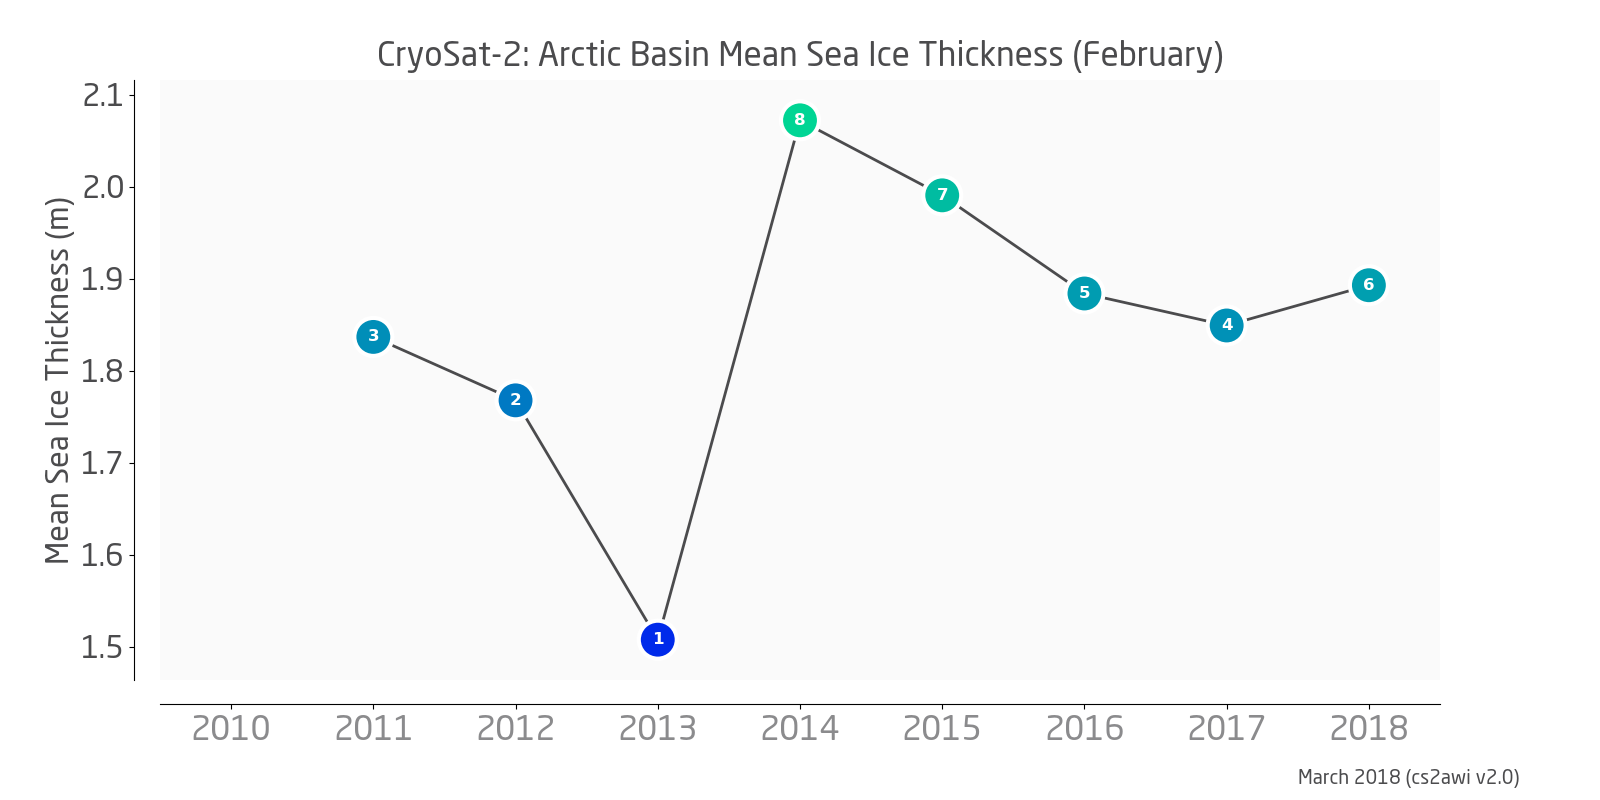 Arctic Basin Mean Sea Ice Thickness time series (February)